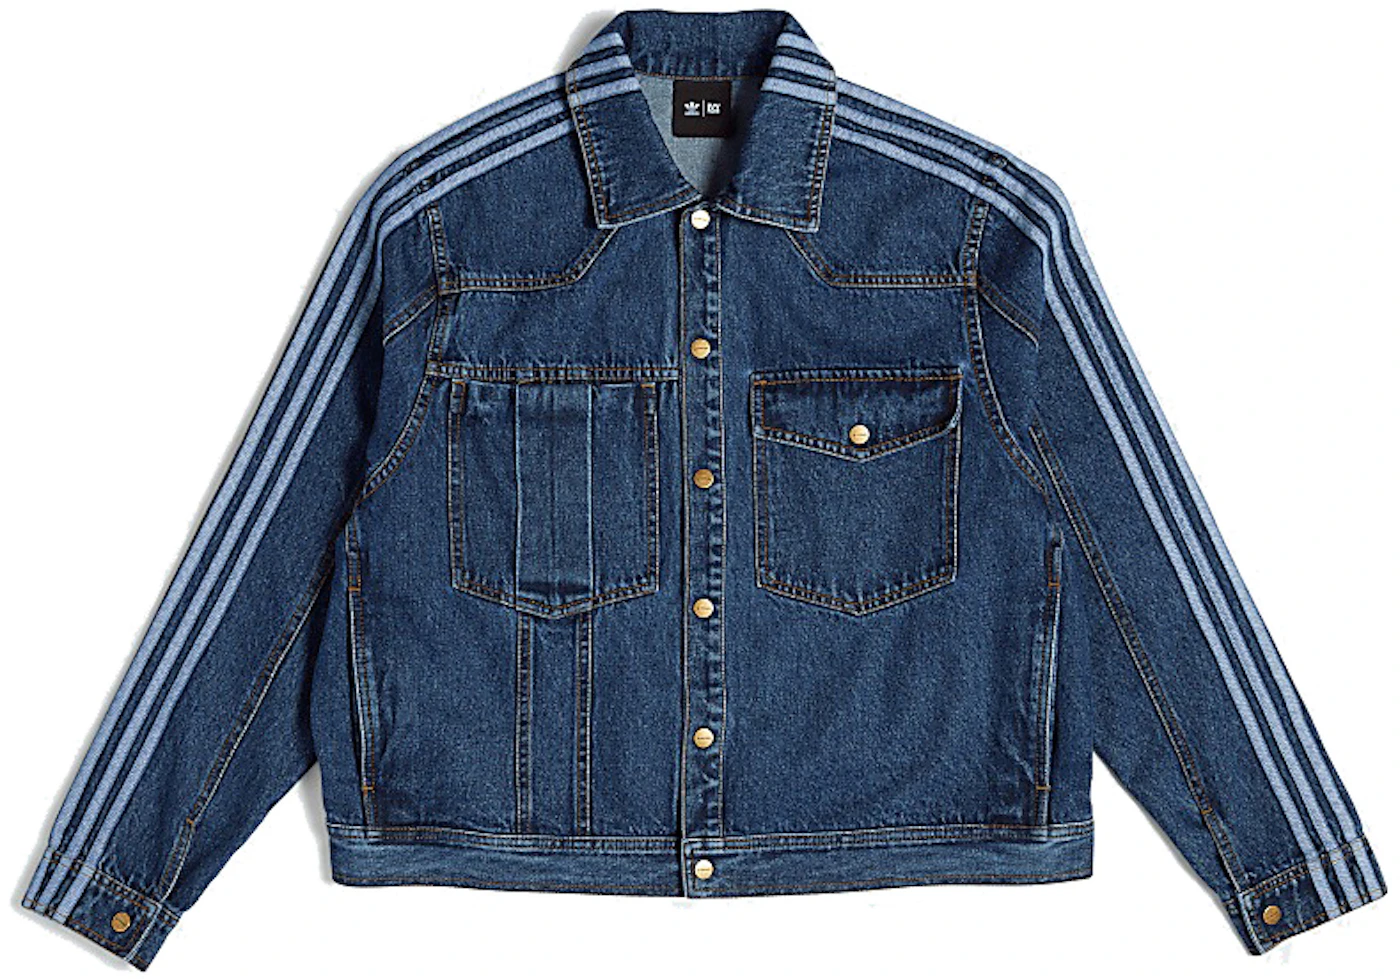 Monogram Printed Denim Jacket, Blue, Contact Seller for Other Sizes